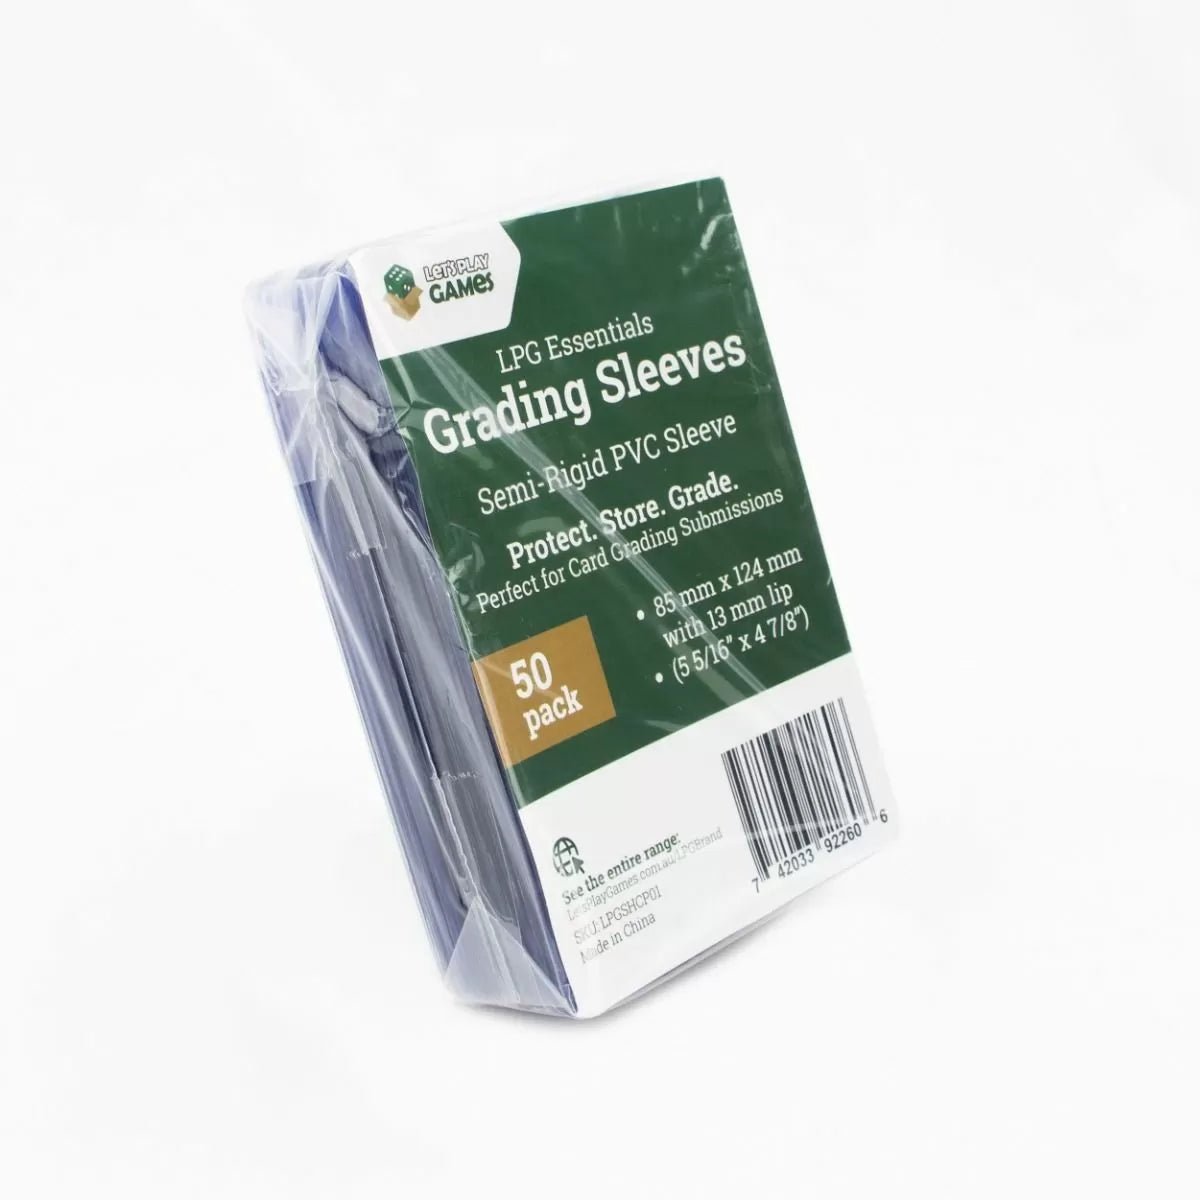 Grading Sleeves 85 X 124mm 50 Pack - THE CARD SPOT PTY LTD.ProtectionLPG